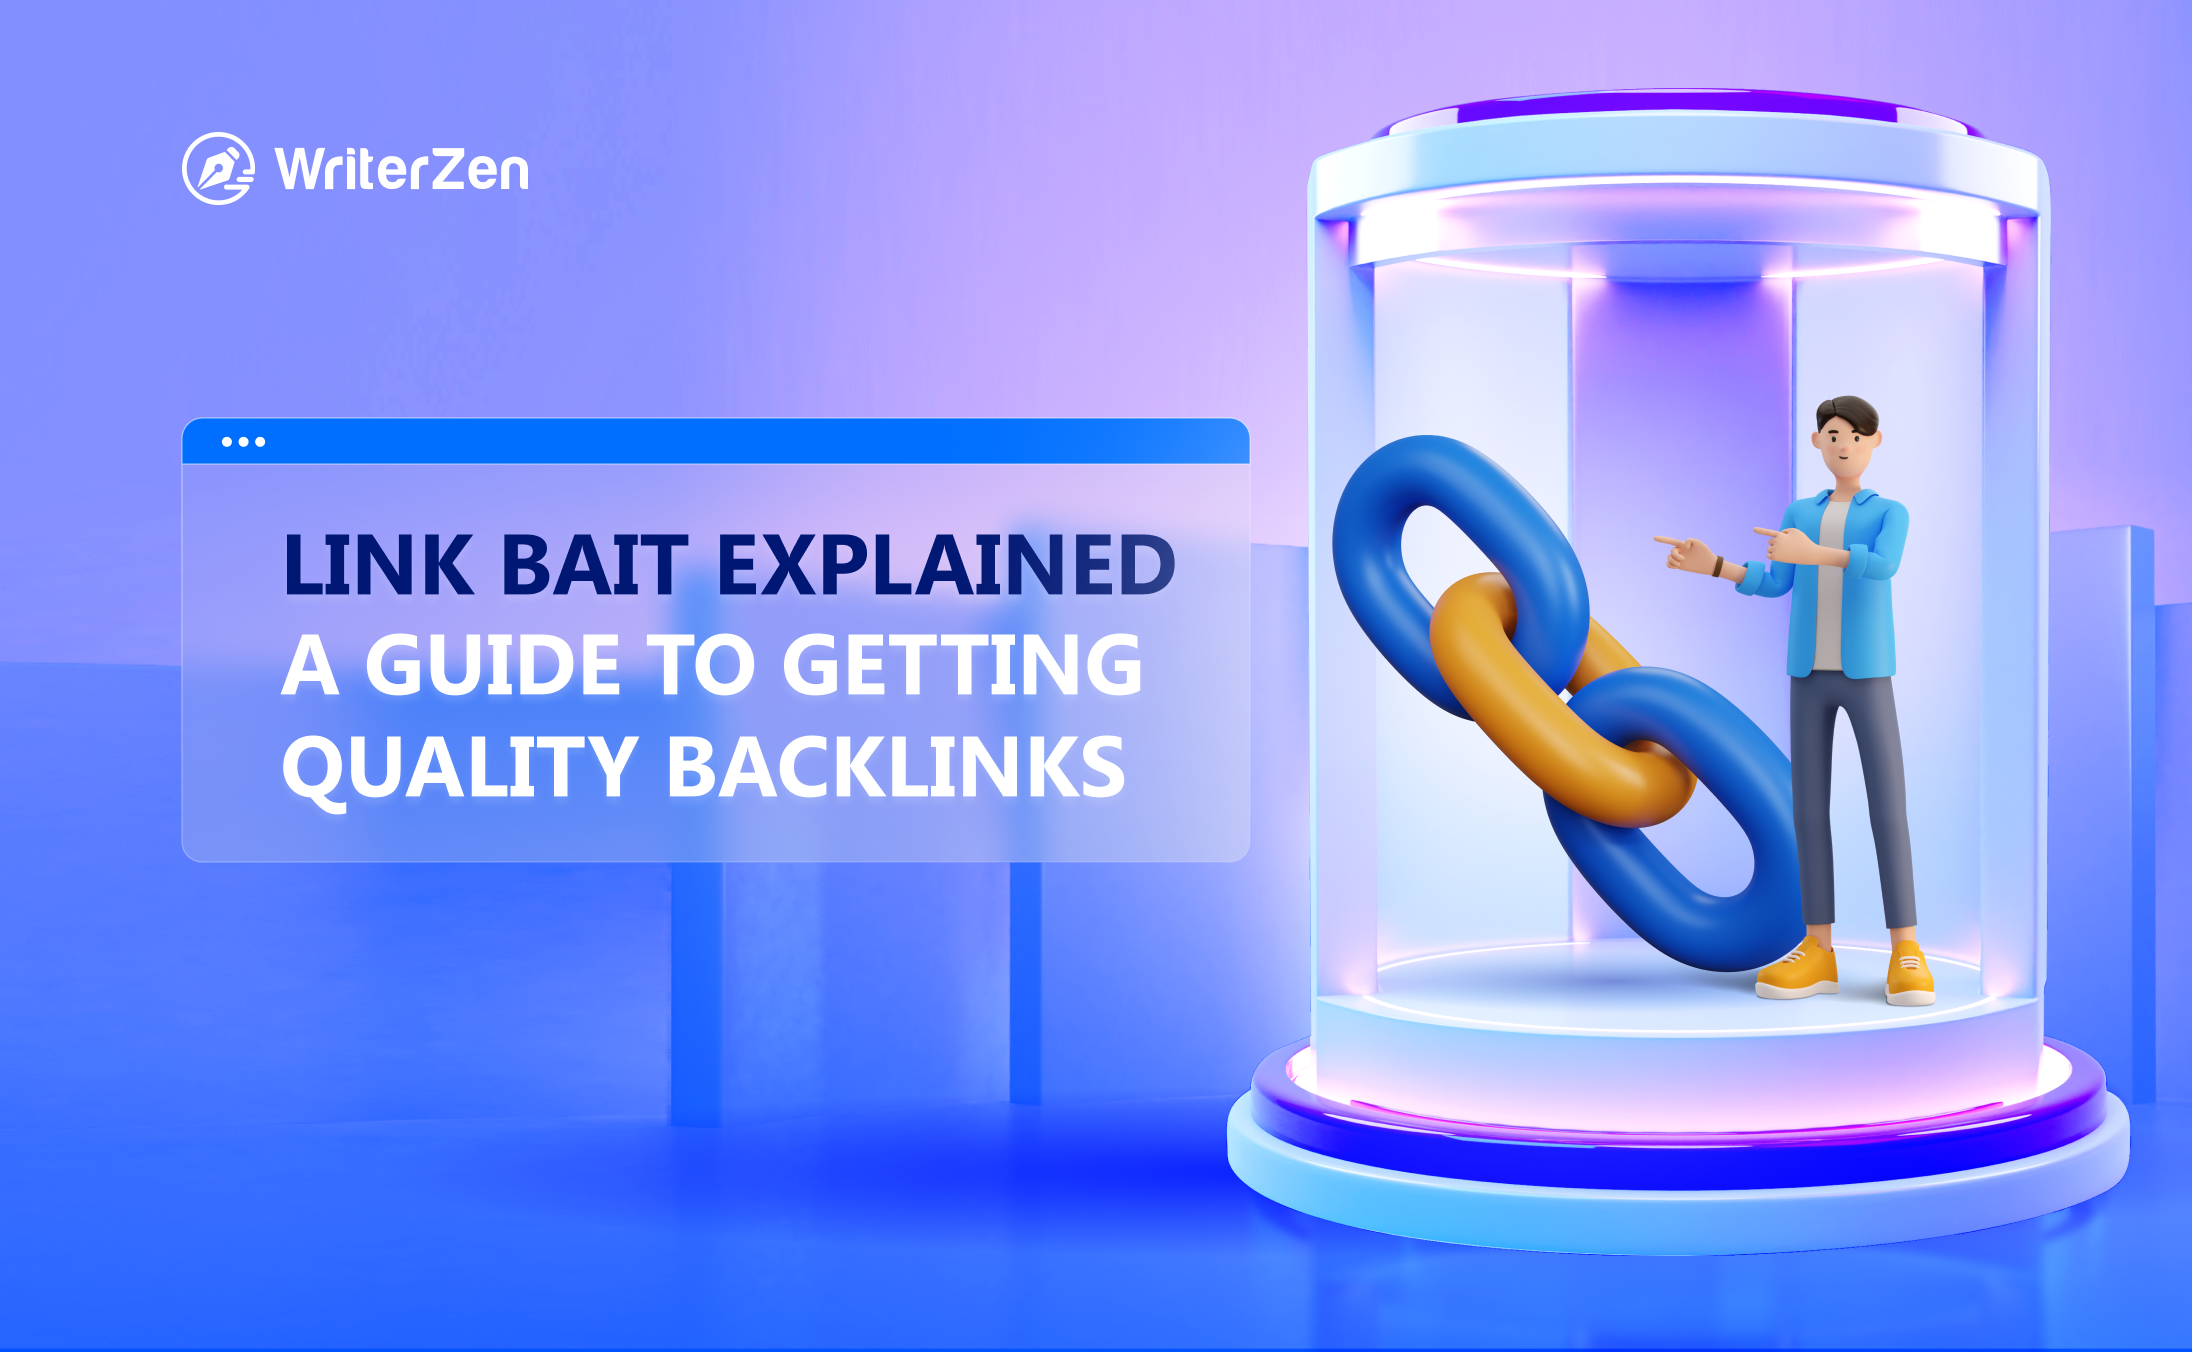 /storage/photos/1/blog-5.51/link-bait-explained-a-guide-to-getting-quality-backlinks.webp